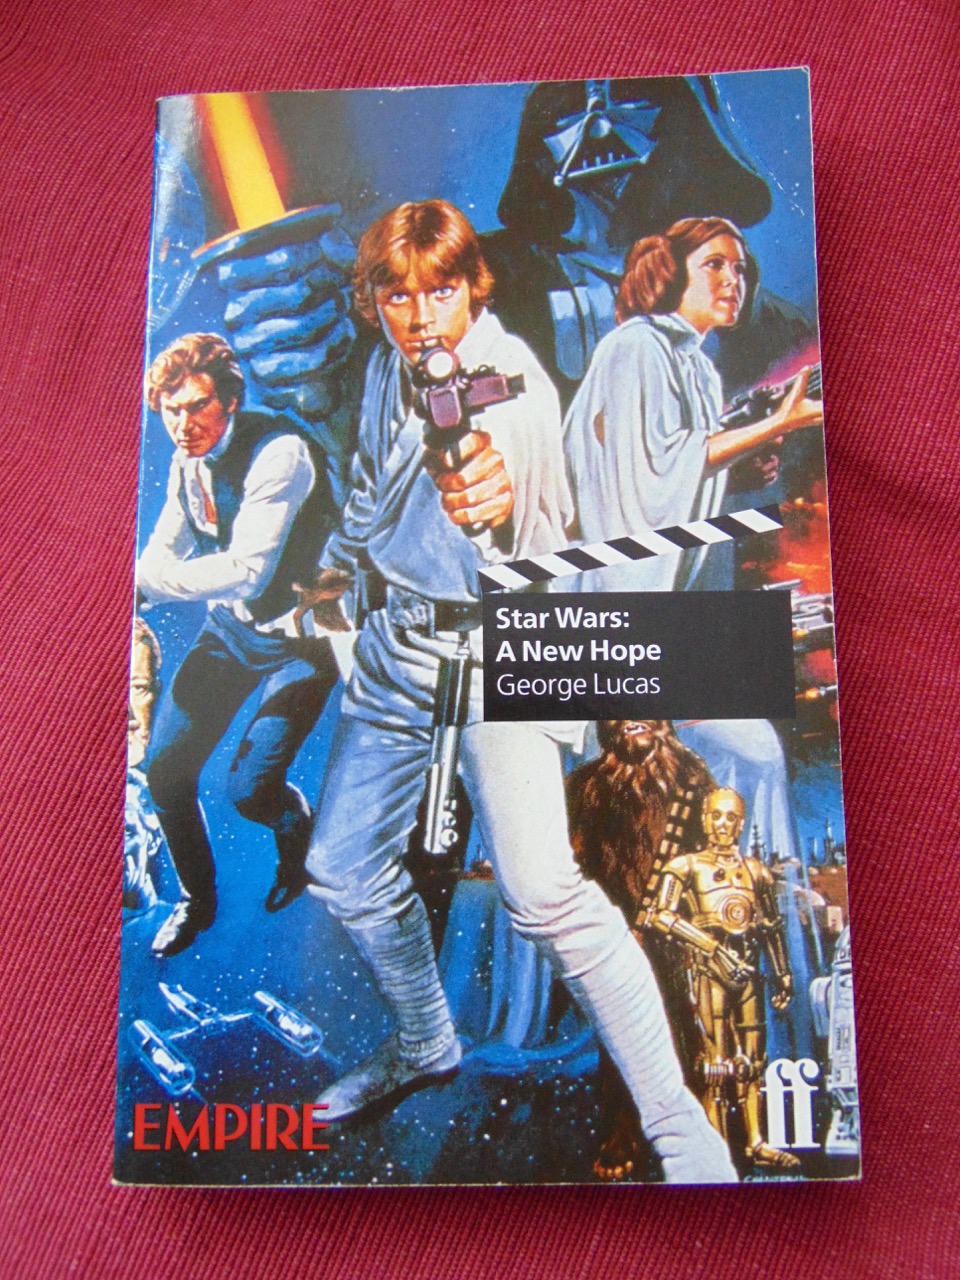 A New Hope book